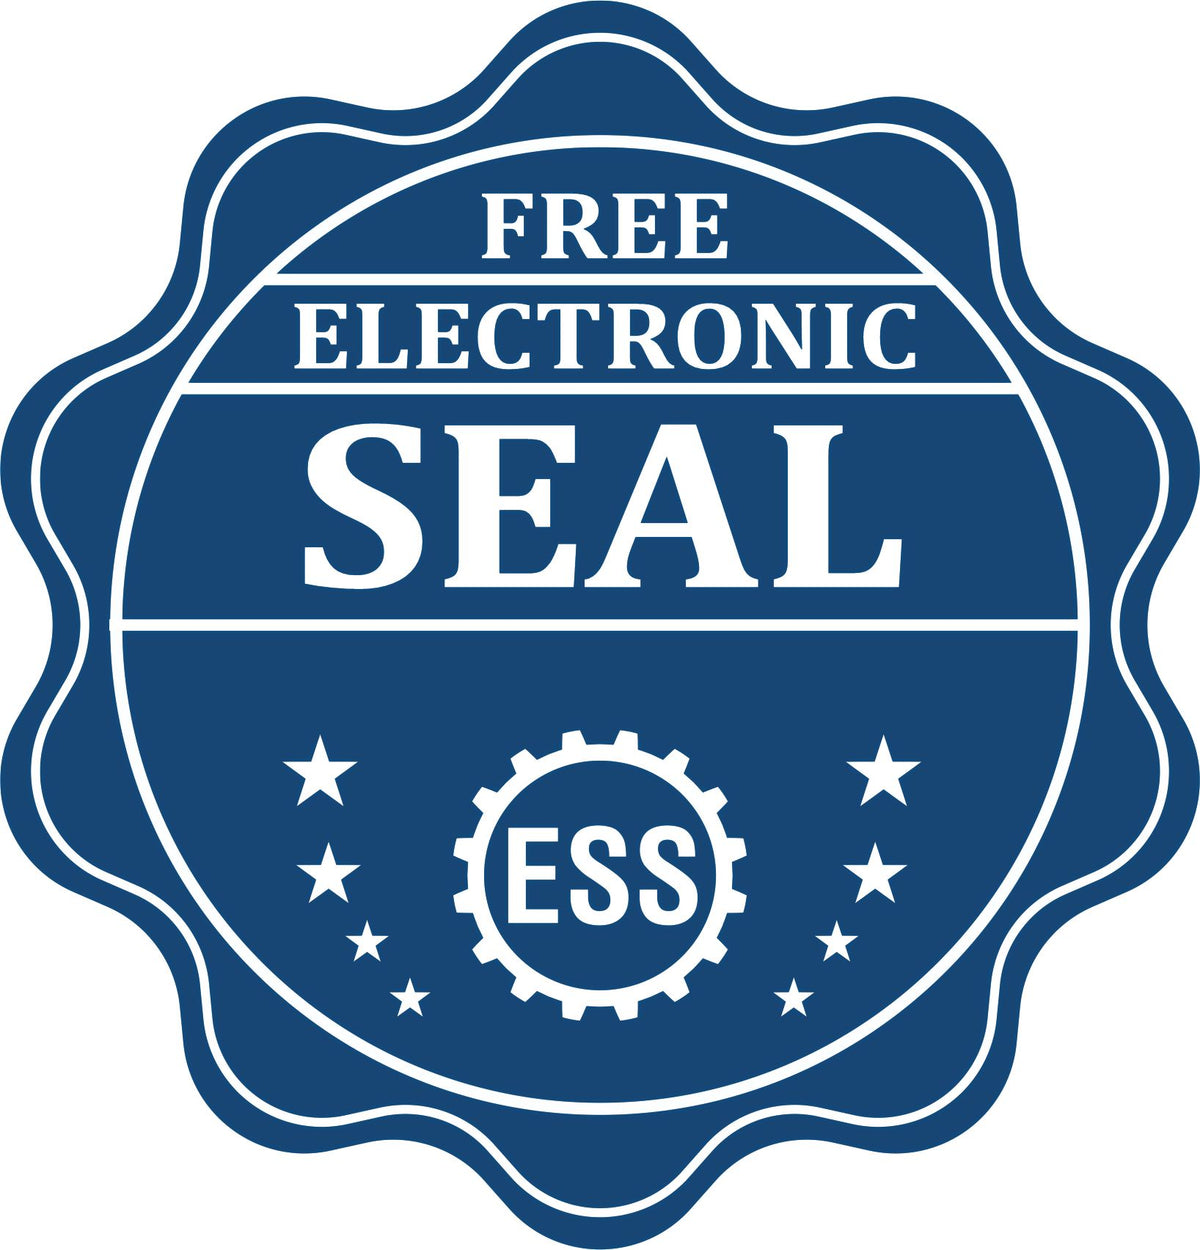 A badge showing a free electronic seal for the Gift New Mexico Engineer Seal with stars and the ESS gear on the emblem.